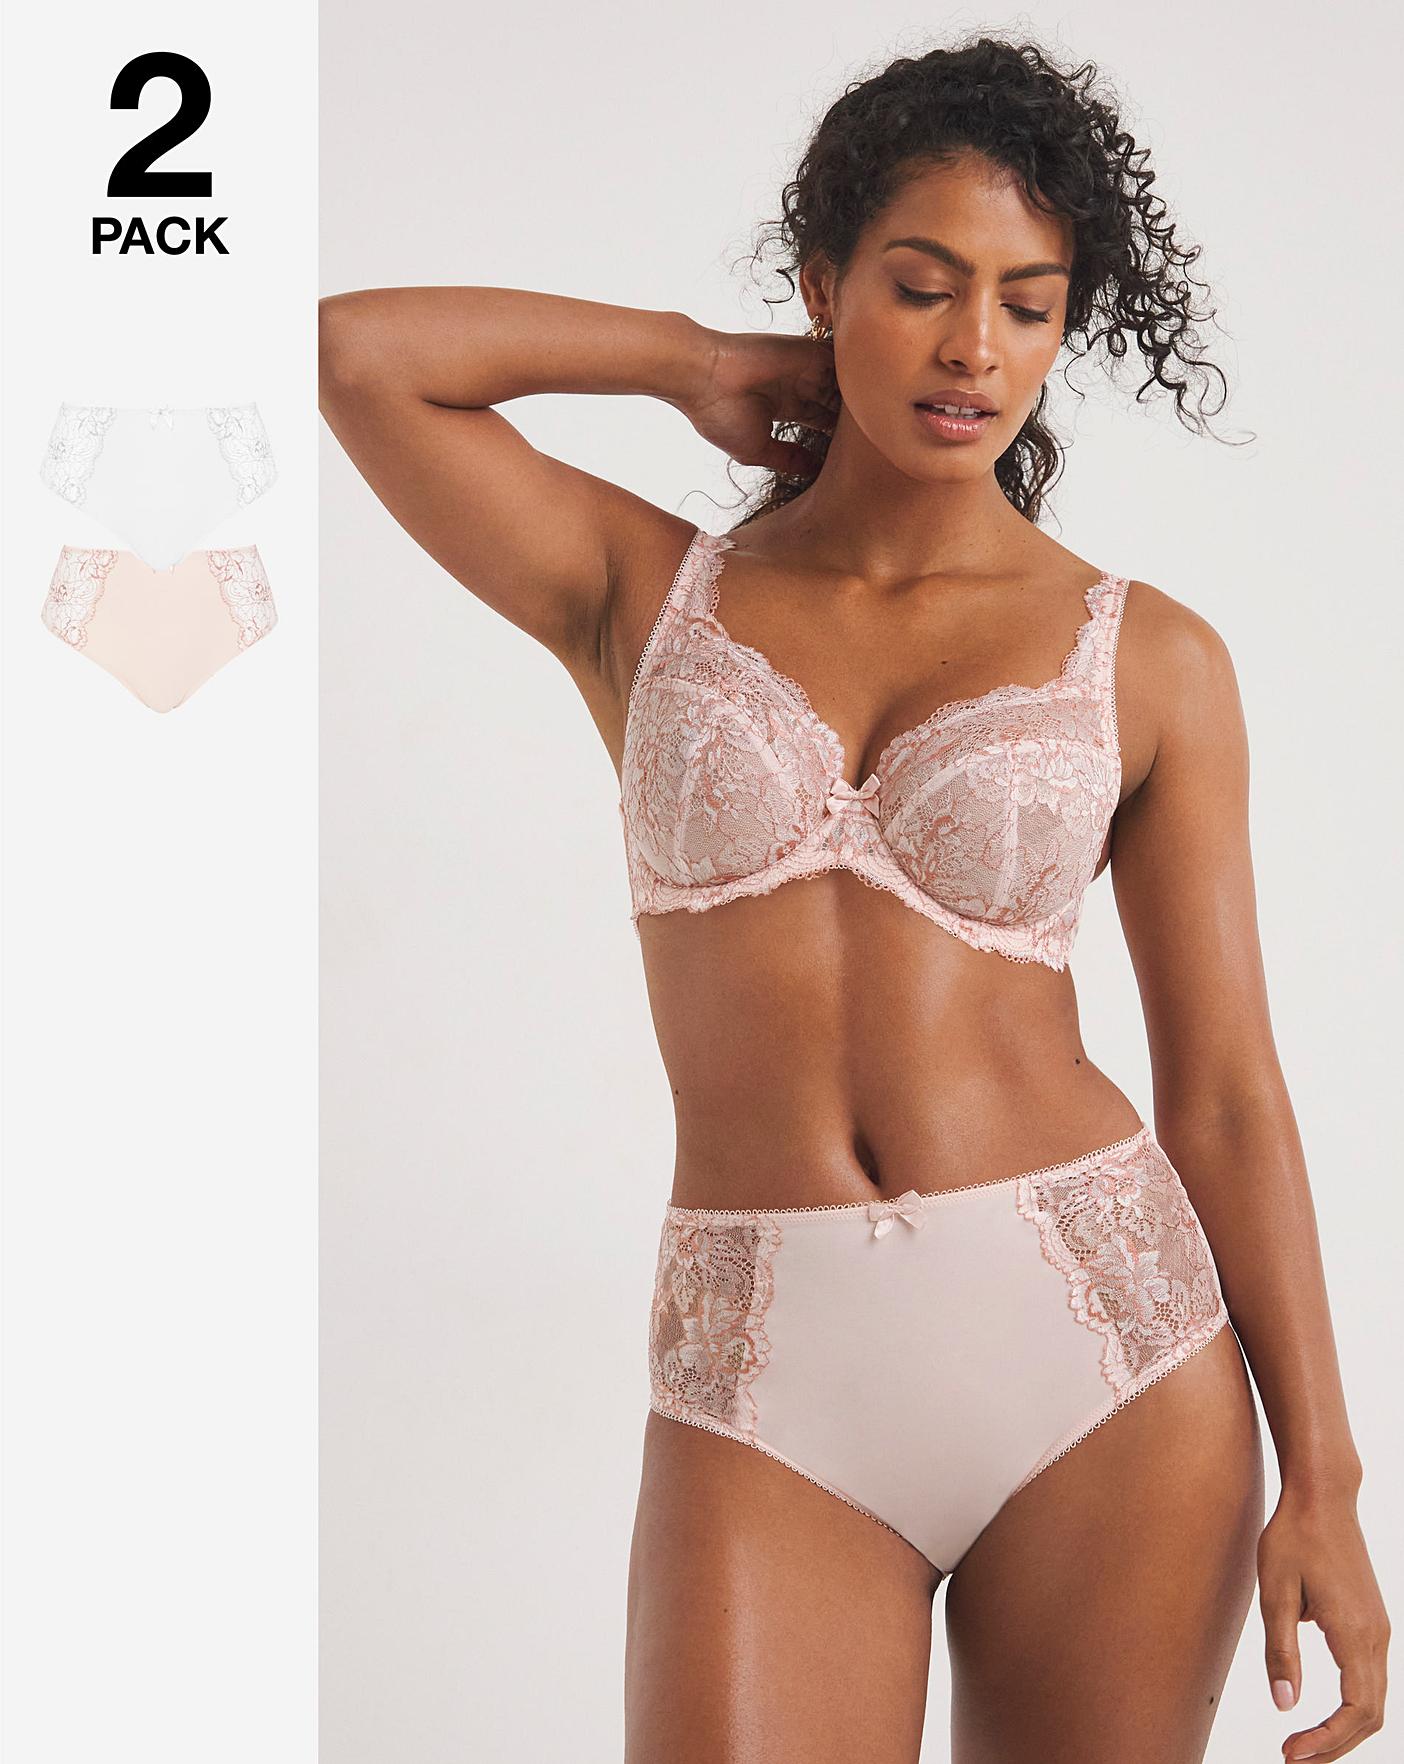 Buy PrettyCat Lightly Padded Underwired Full Cup Lace Multiway Bra